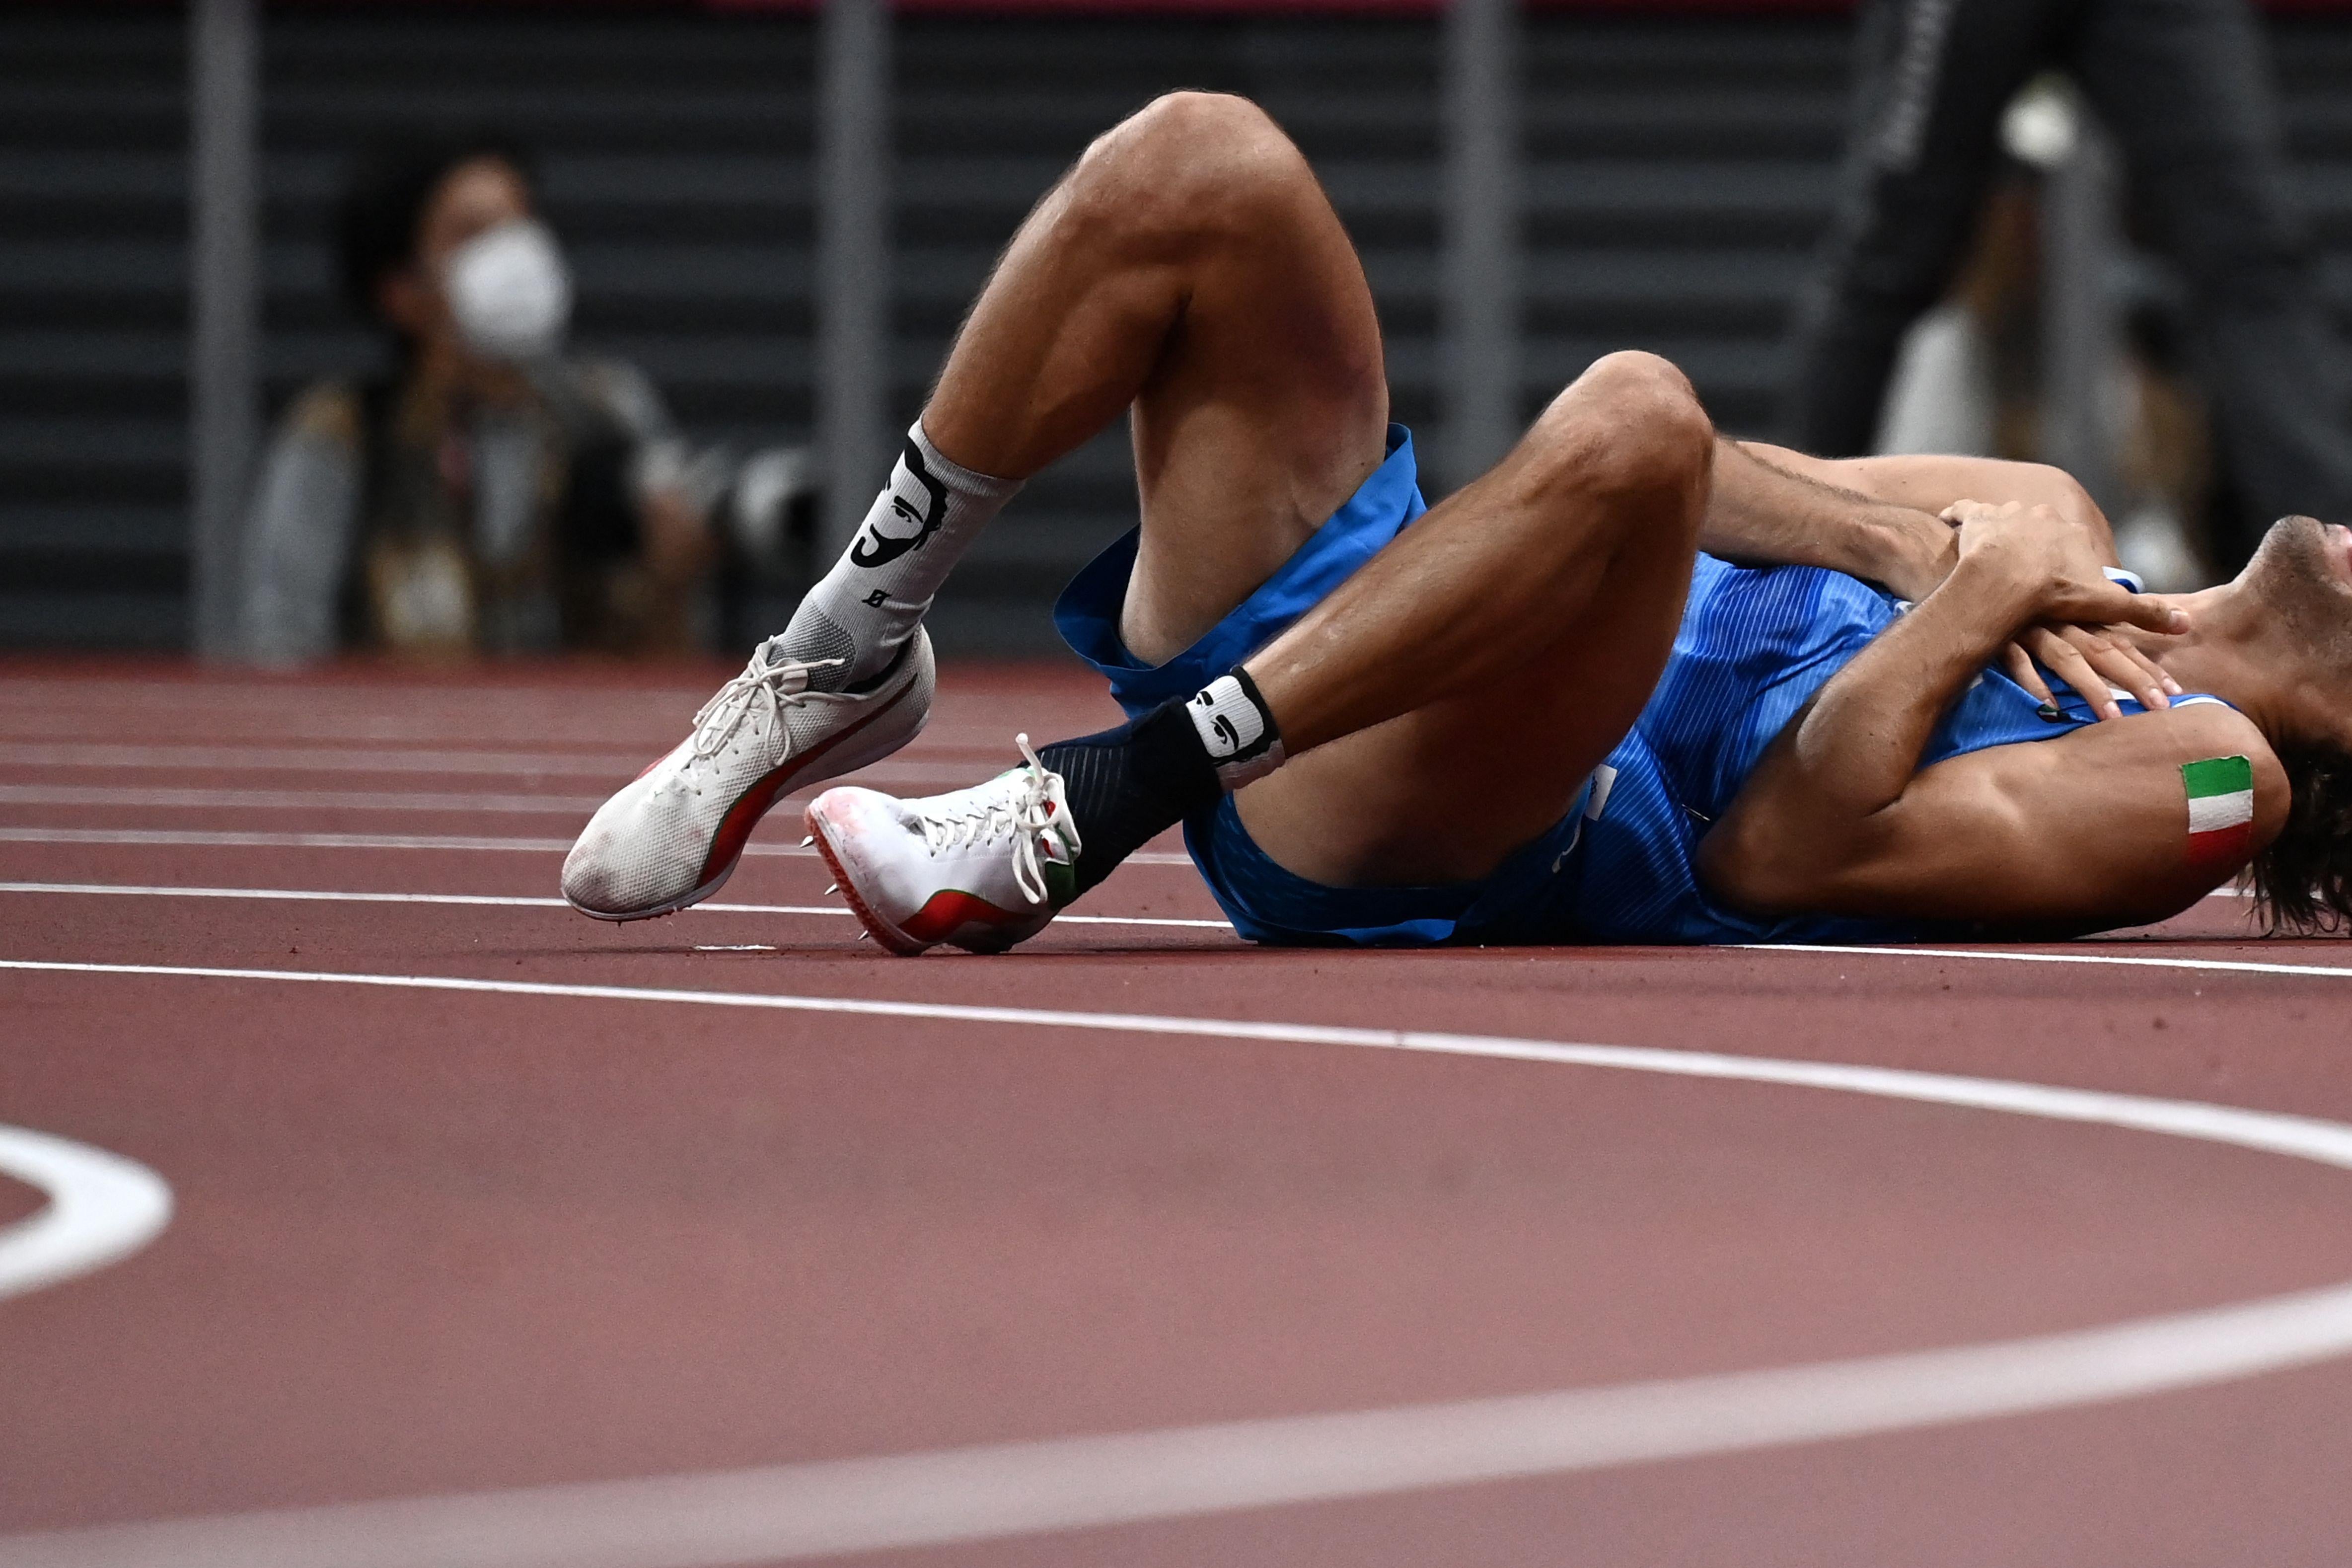 A high jumper lies on his back on the track, rolling on the ground, holding his hands to his heart, and screaming.